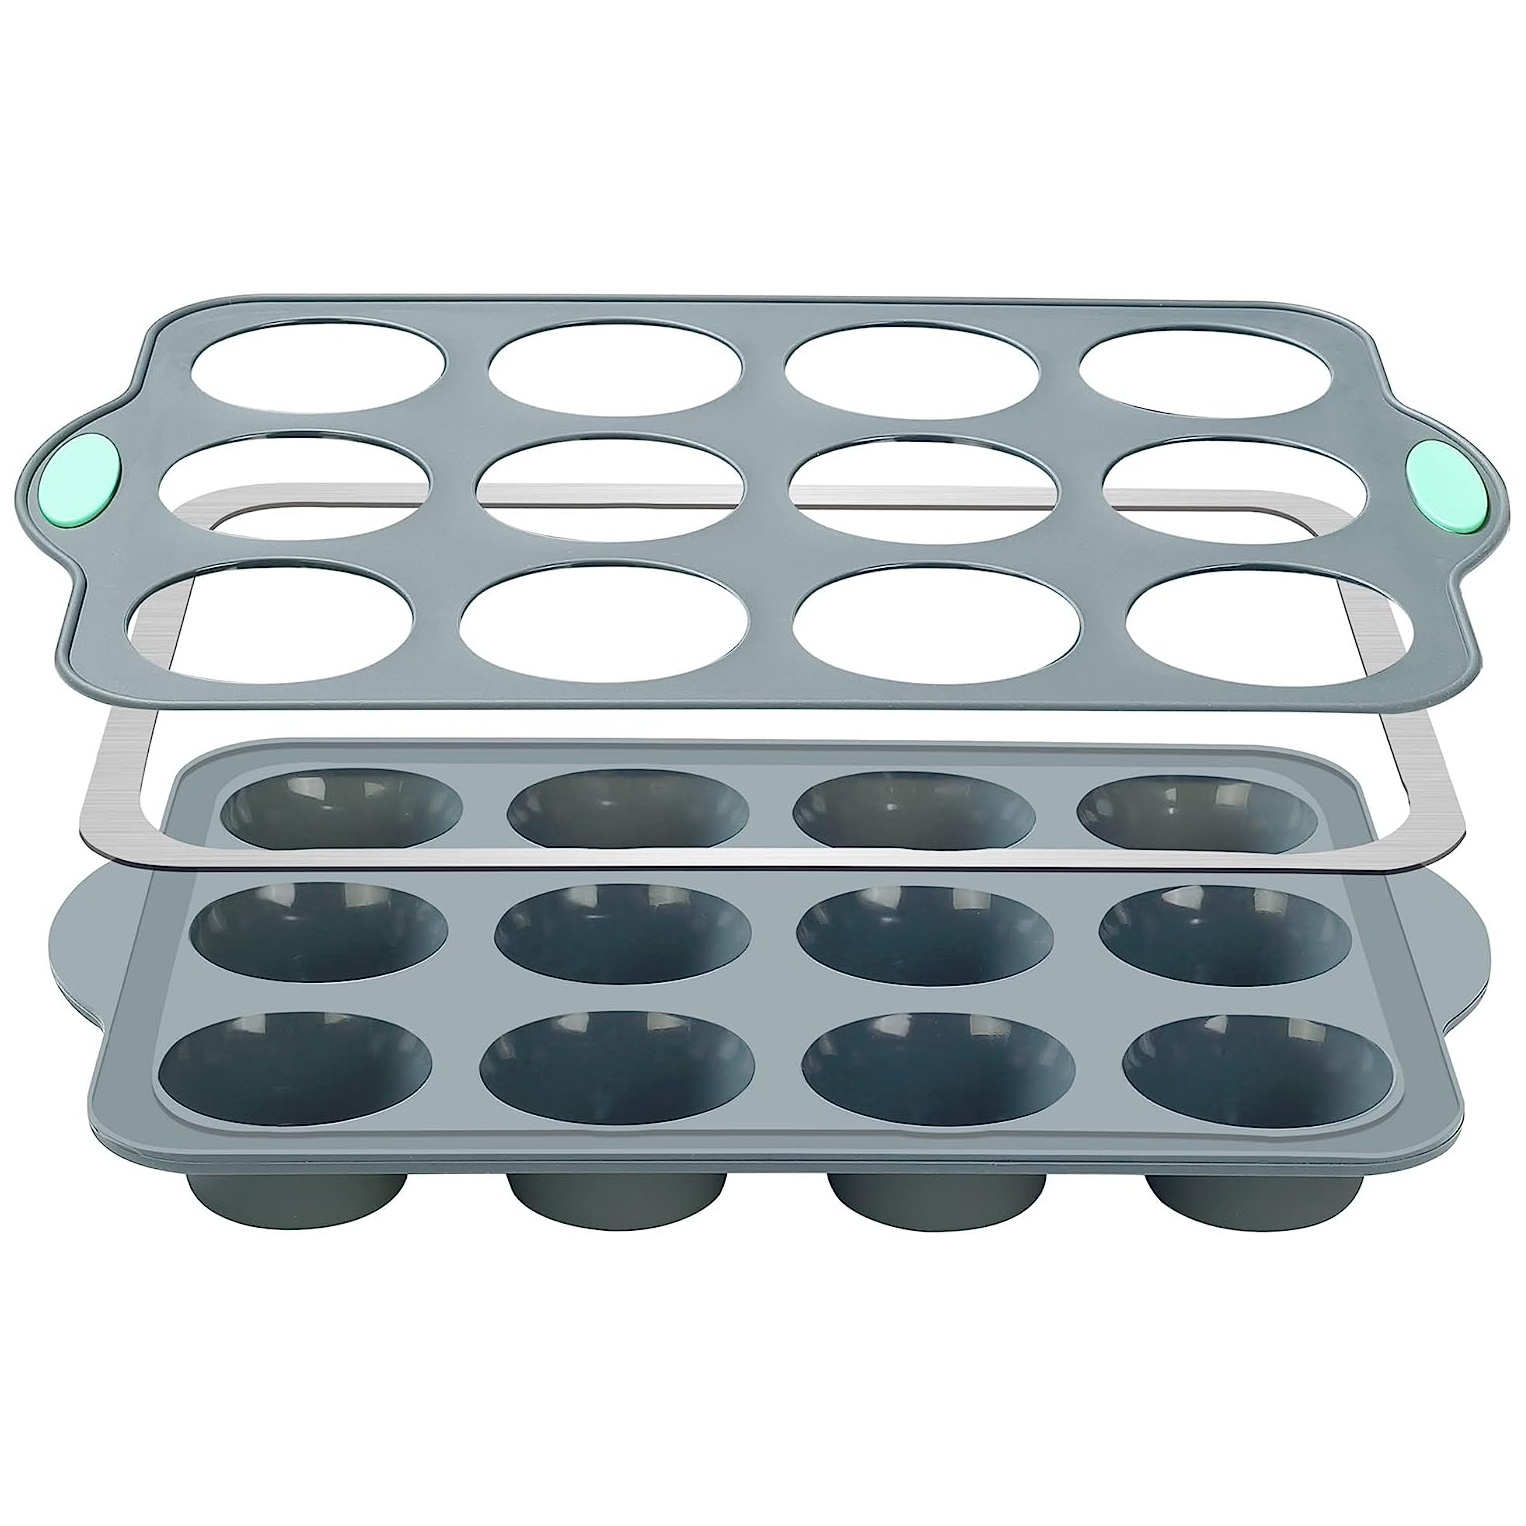 SUPER KITCHEN 12 Cup Silicone Muffin Pan, Nonstick Cupcake Tin Baking Tray  Muffin Mold Bakeware - Pack of 2 